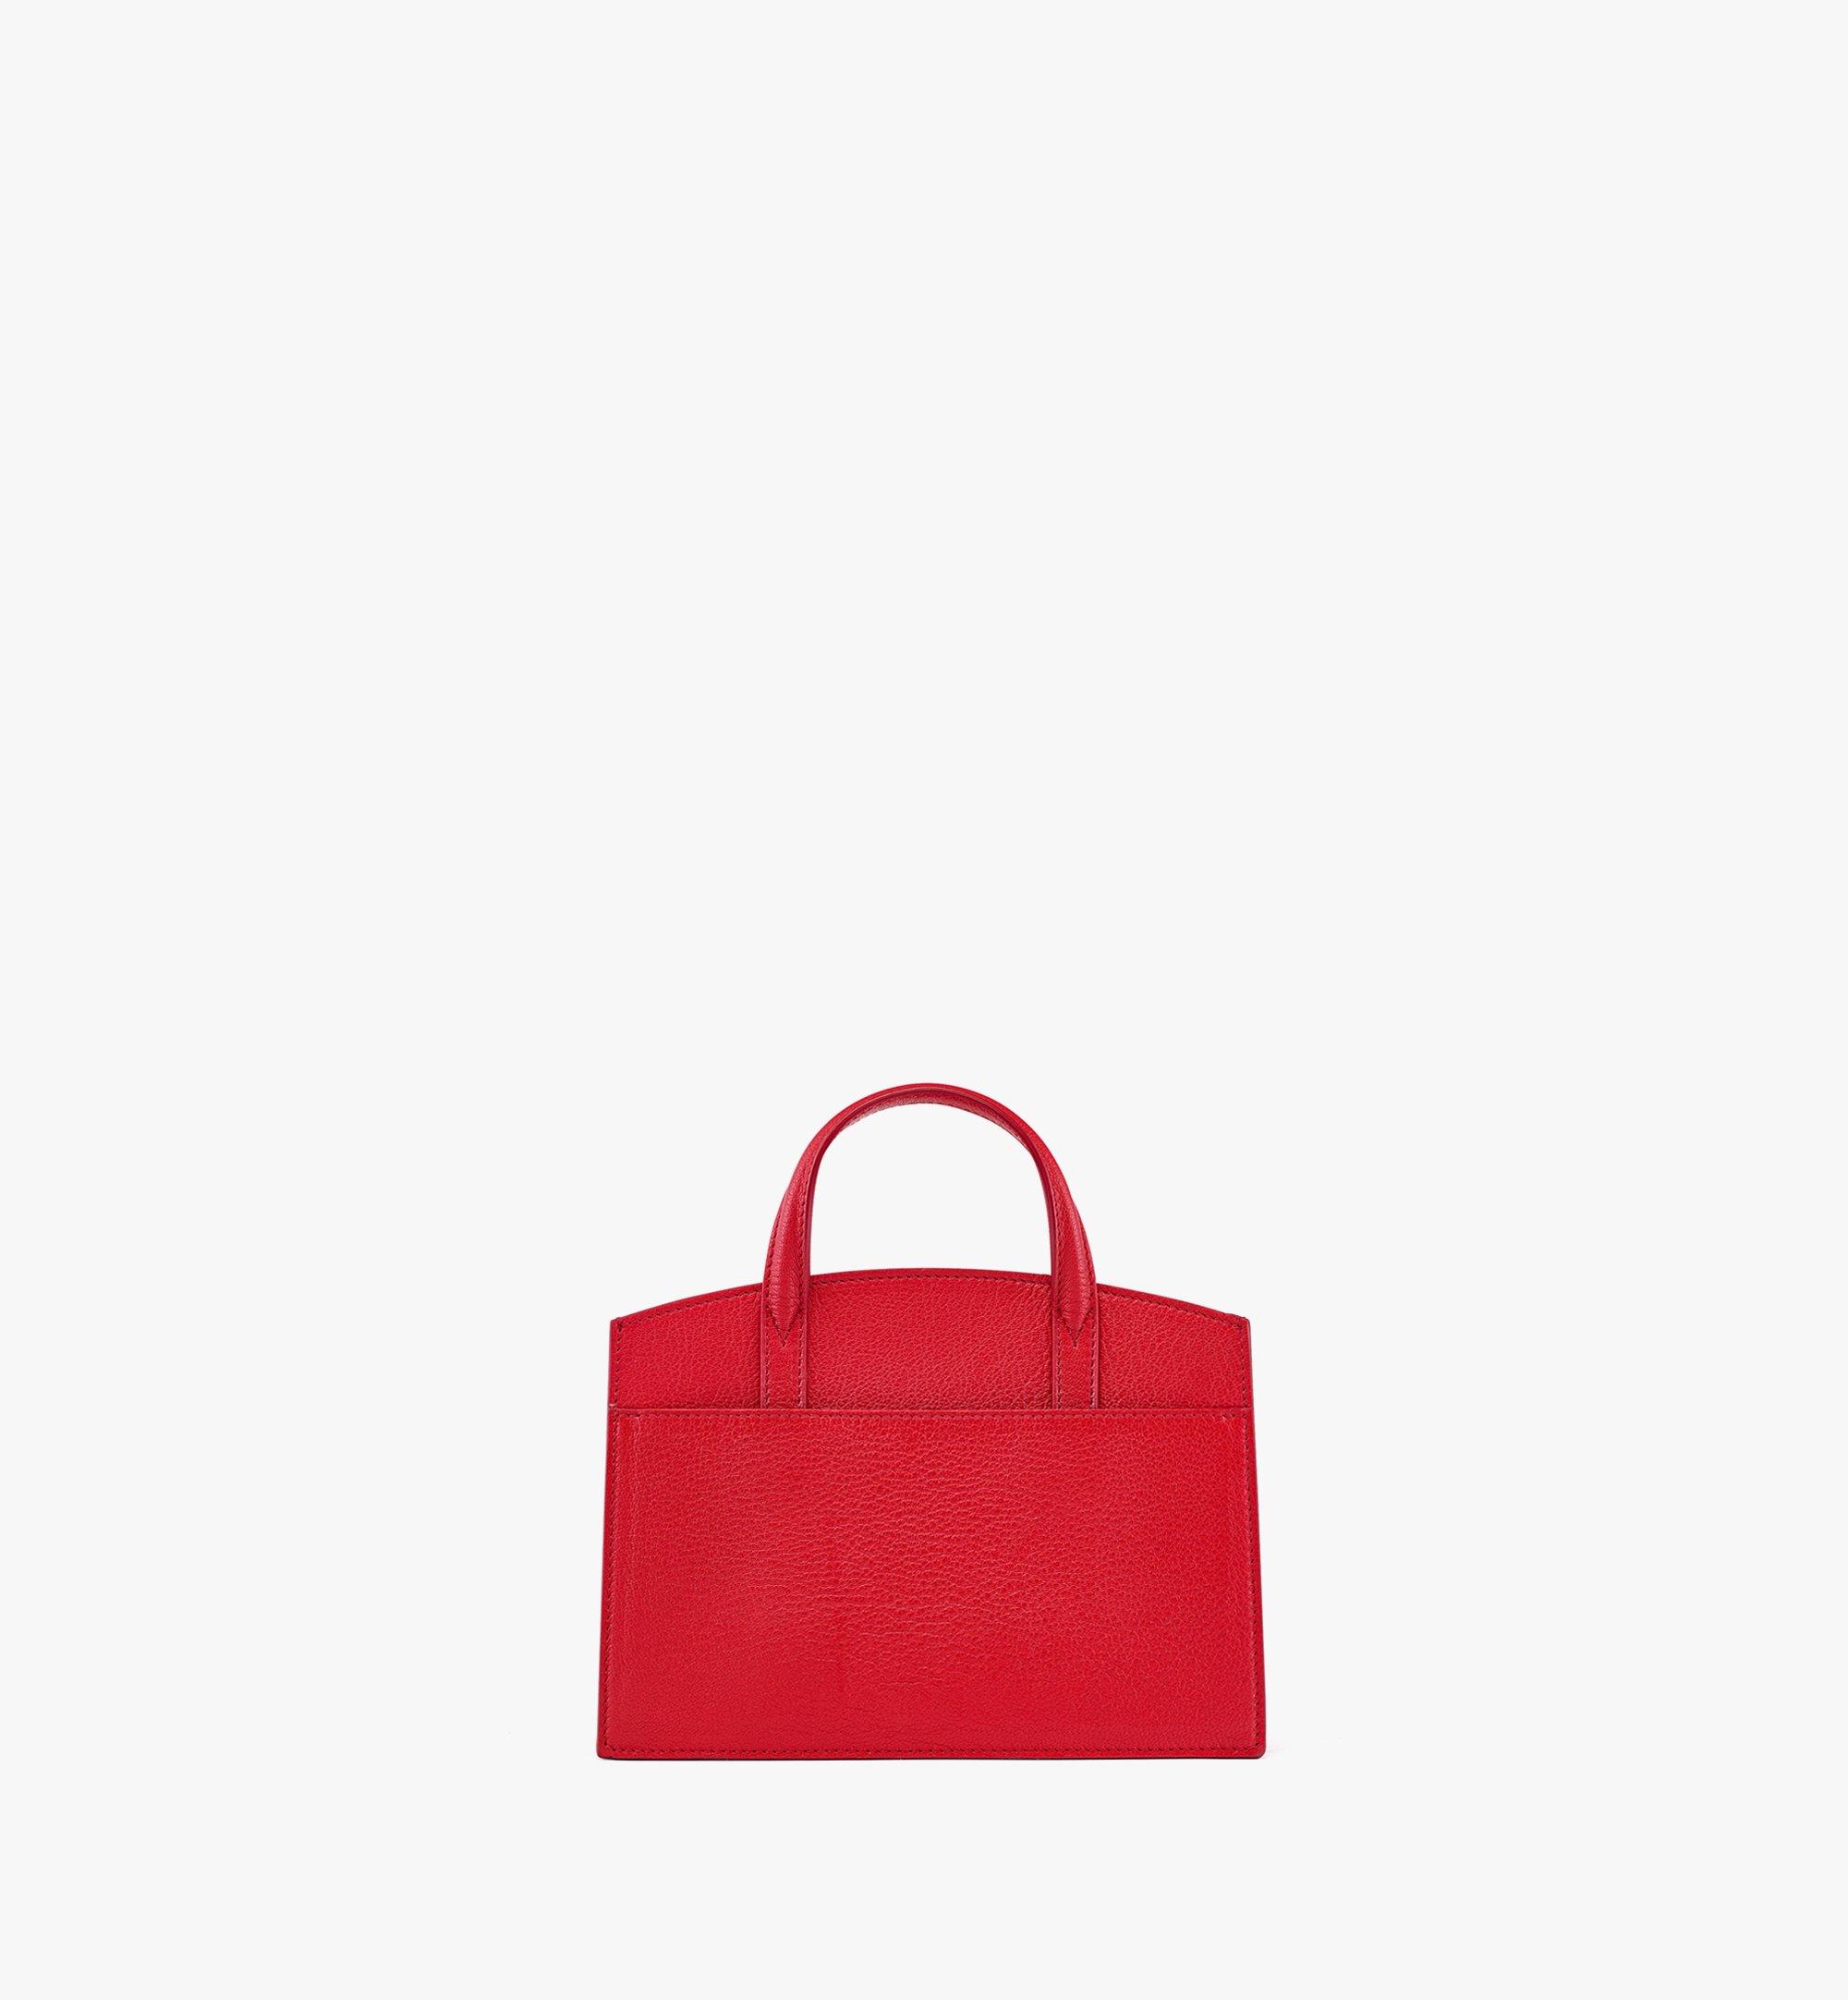 MCM Upcycling Project Jewelry Milano Tote in Gradient Goatskin Leather Red MWTCSUP03FJ001 Alternate View 3